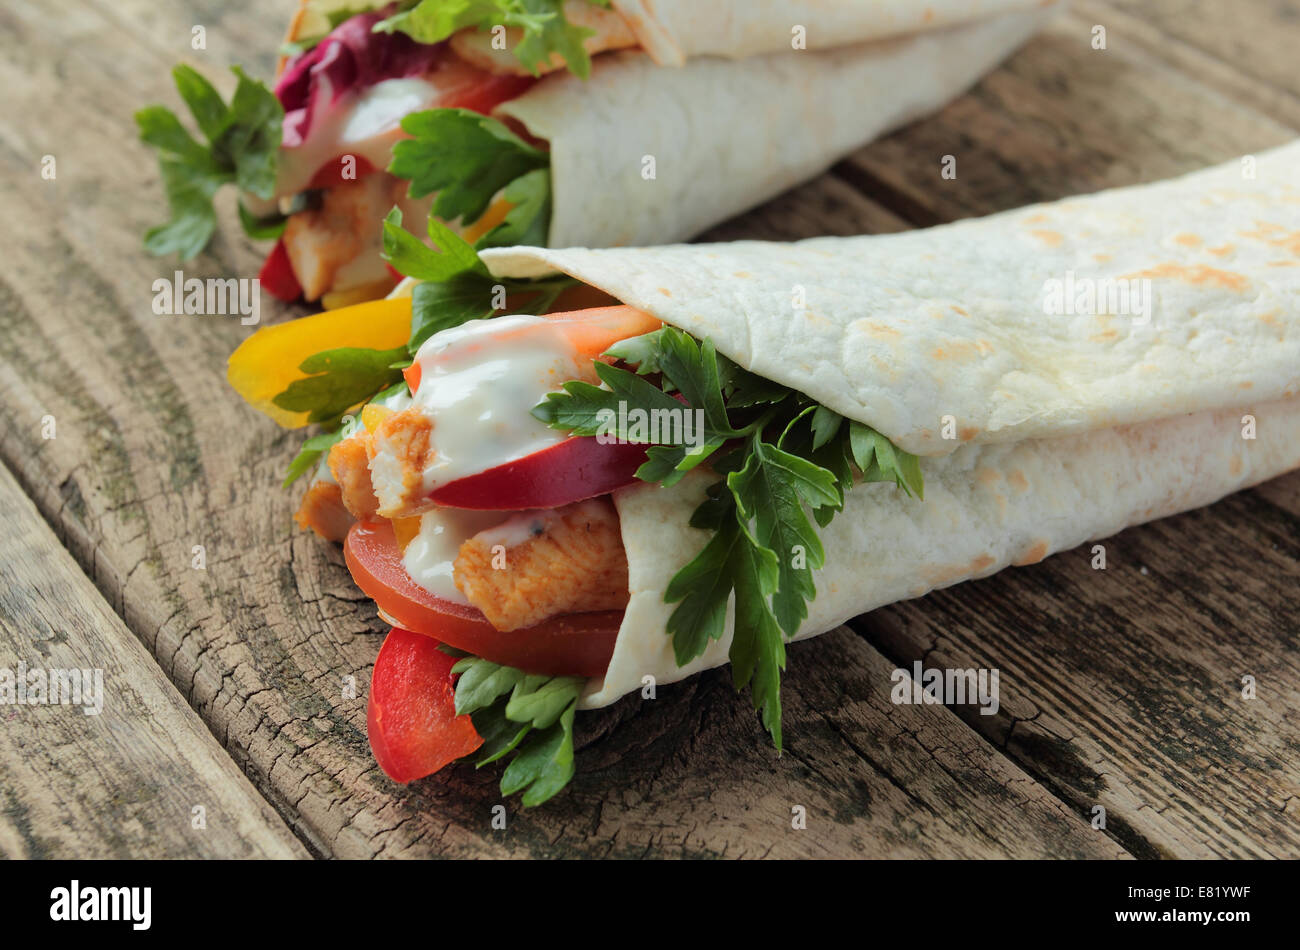 Wraps with chicken, garlic dressing and vegetables Stock Photo